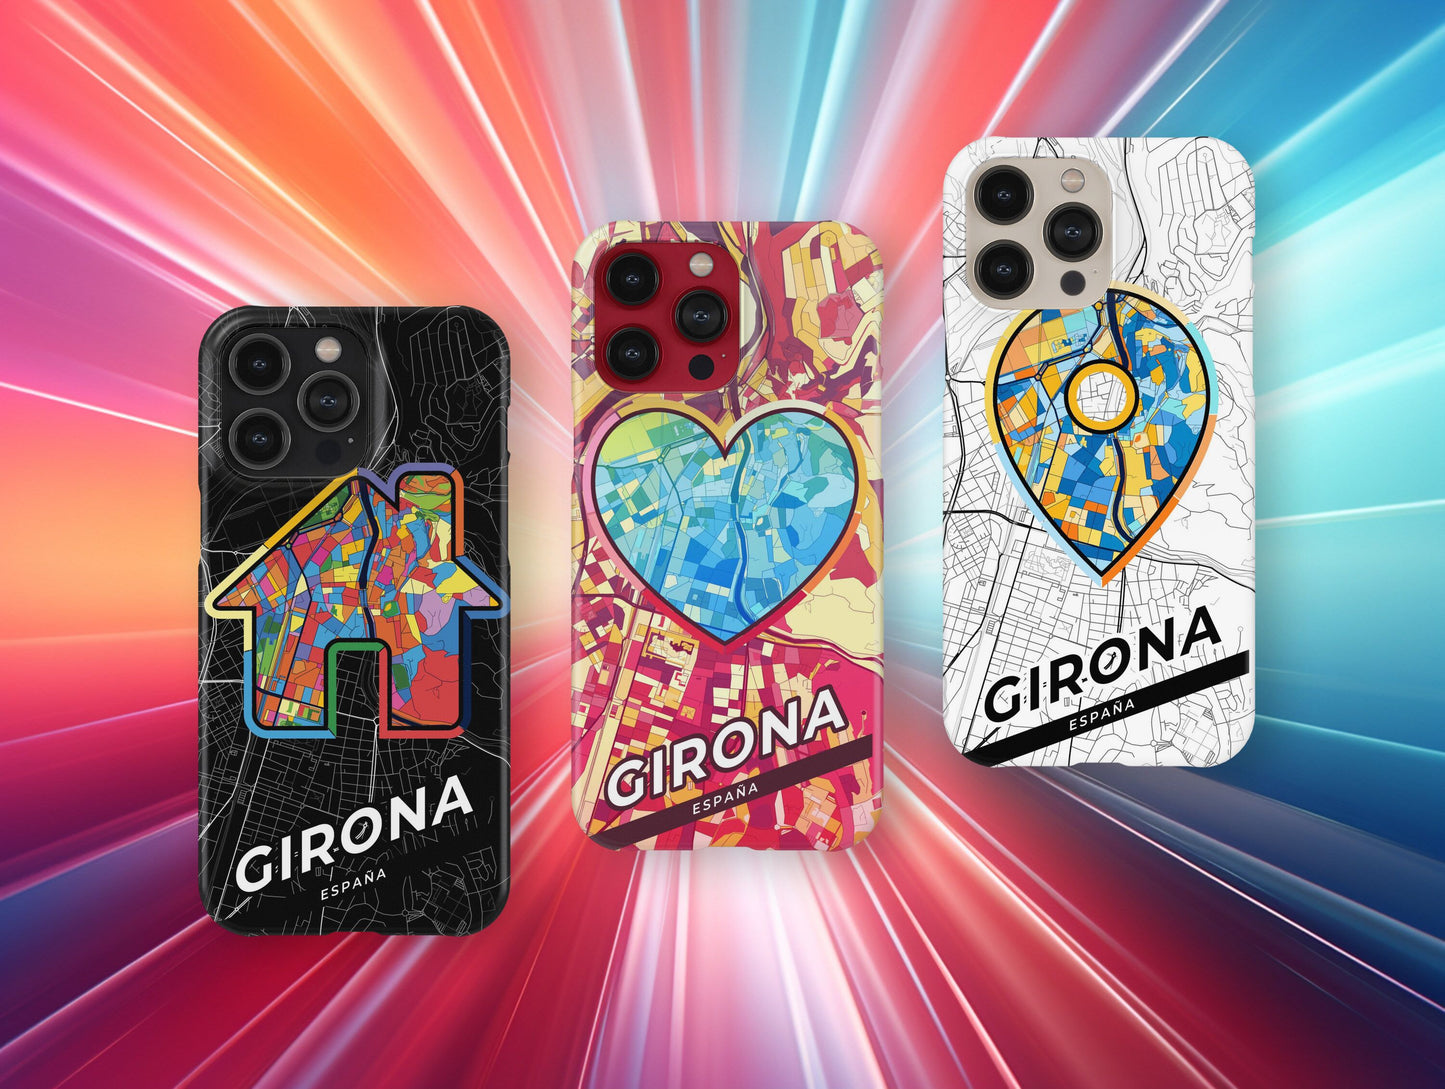 Girona Spain slim phone case with colorful icon. Birthday, wedding or housewarming gift. Couple match cases.